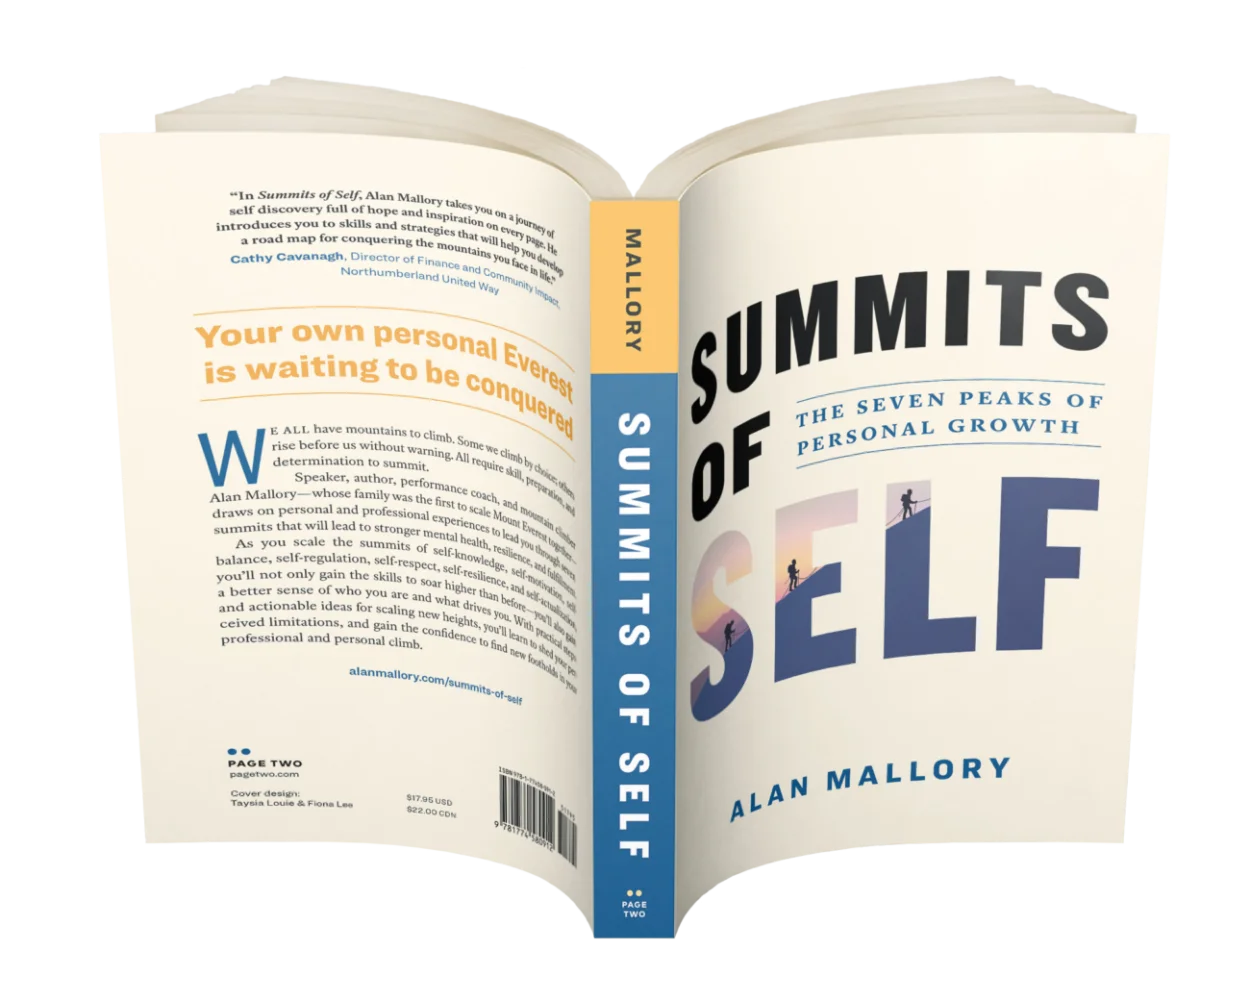 Cover photo of Summits of Self: The Seven Peaks of Personal Growth by Alan Mallory